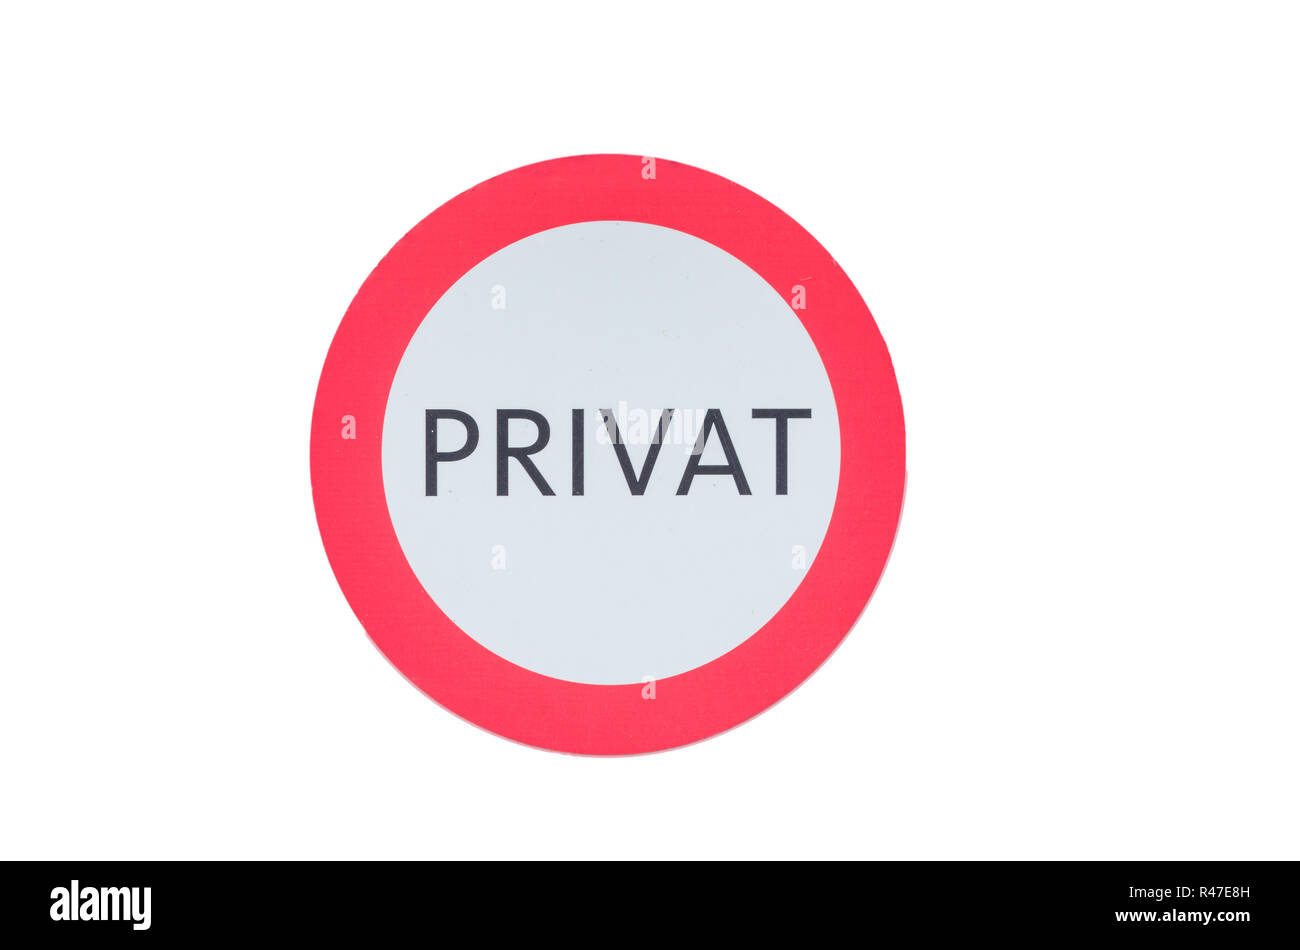 round sign saying private Stock Photo